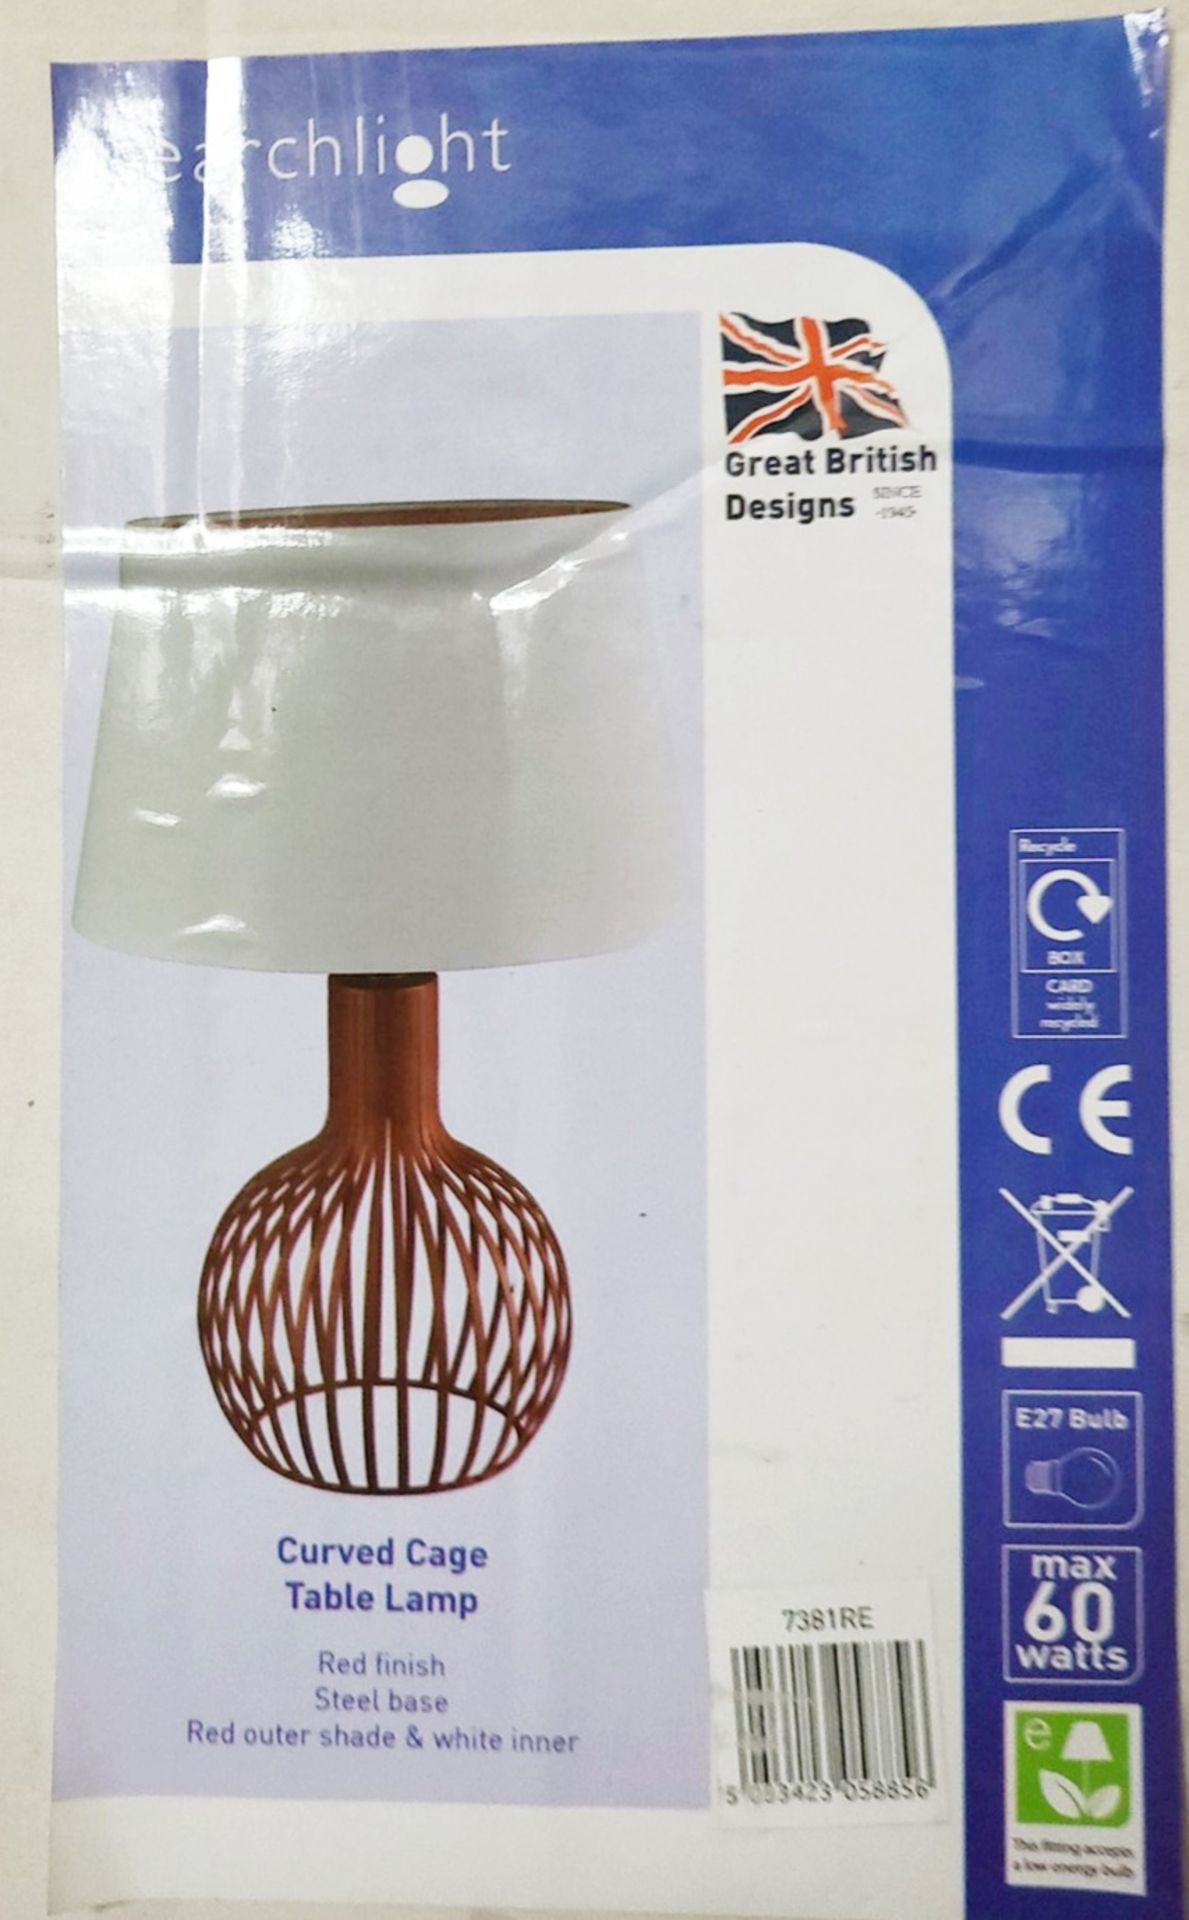 1 x SEARCHLIGHT Curved Cage Table Lamp With Rad Steel Base and White Shade - Type 7381RE